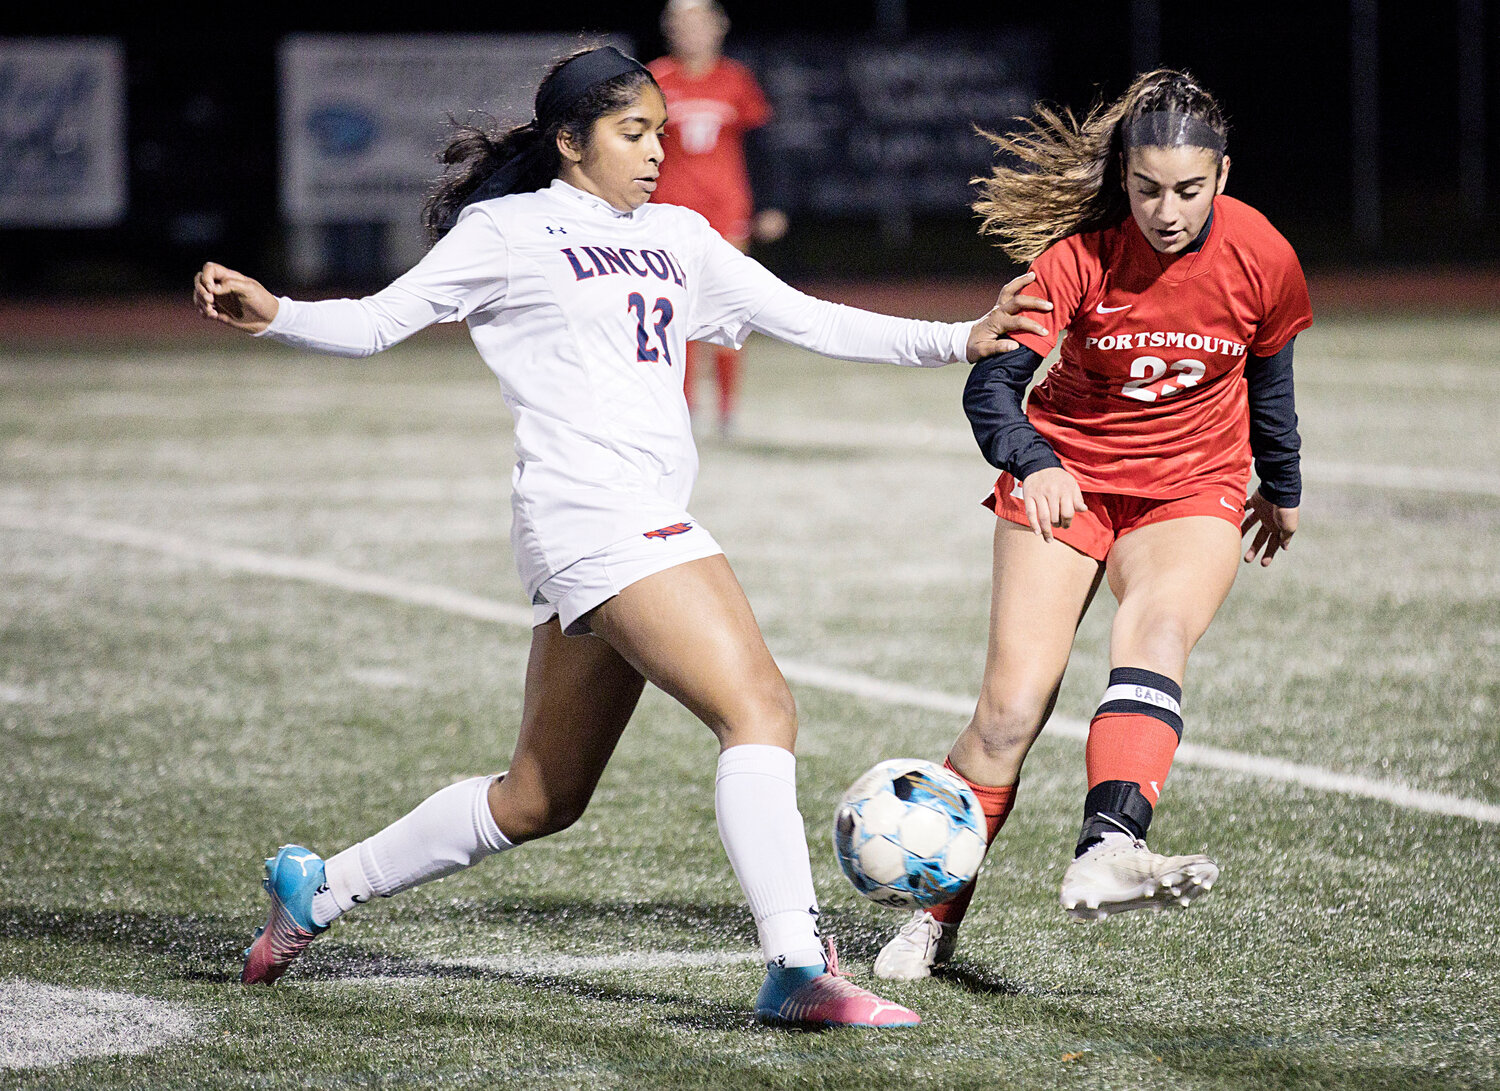 Sophia Karousos knocks the ball away from a Lincoln opponent.